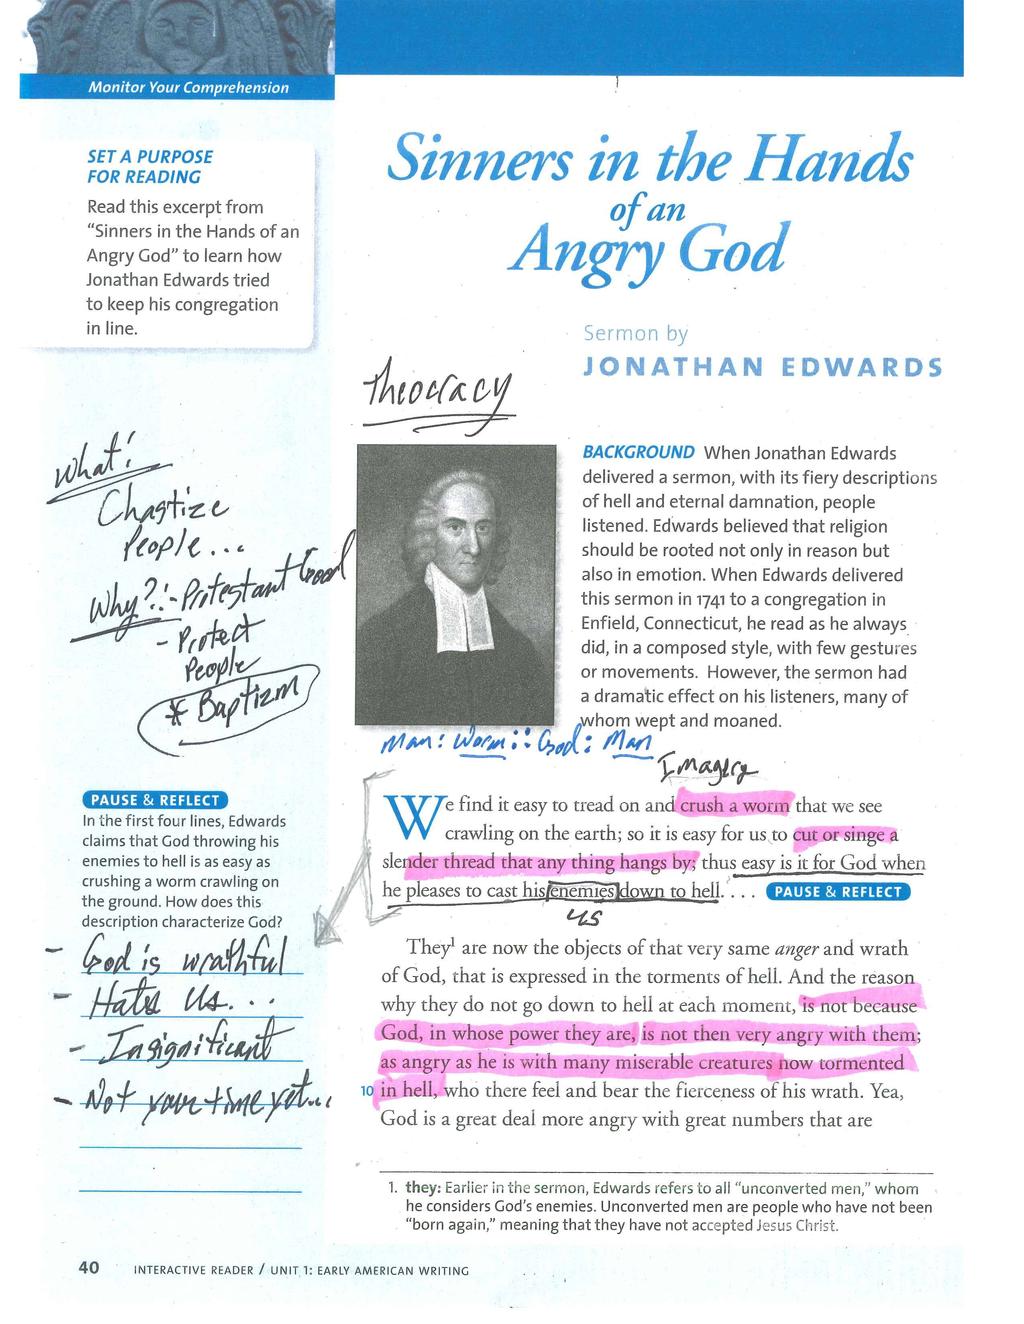 Monitor You Comprehe sion SETA PURPOSE FOR READING Read this excerpt from Sinners in the Hands of an Angry God to learn how Jonathan Edwards tried to keep his congregation in line.